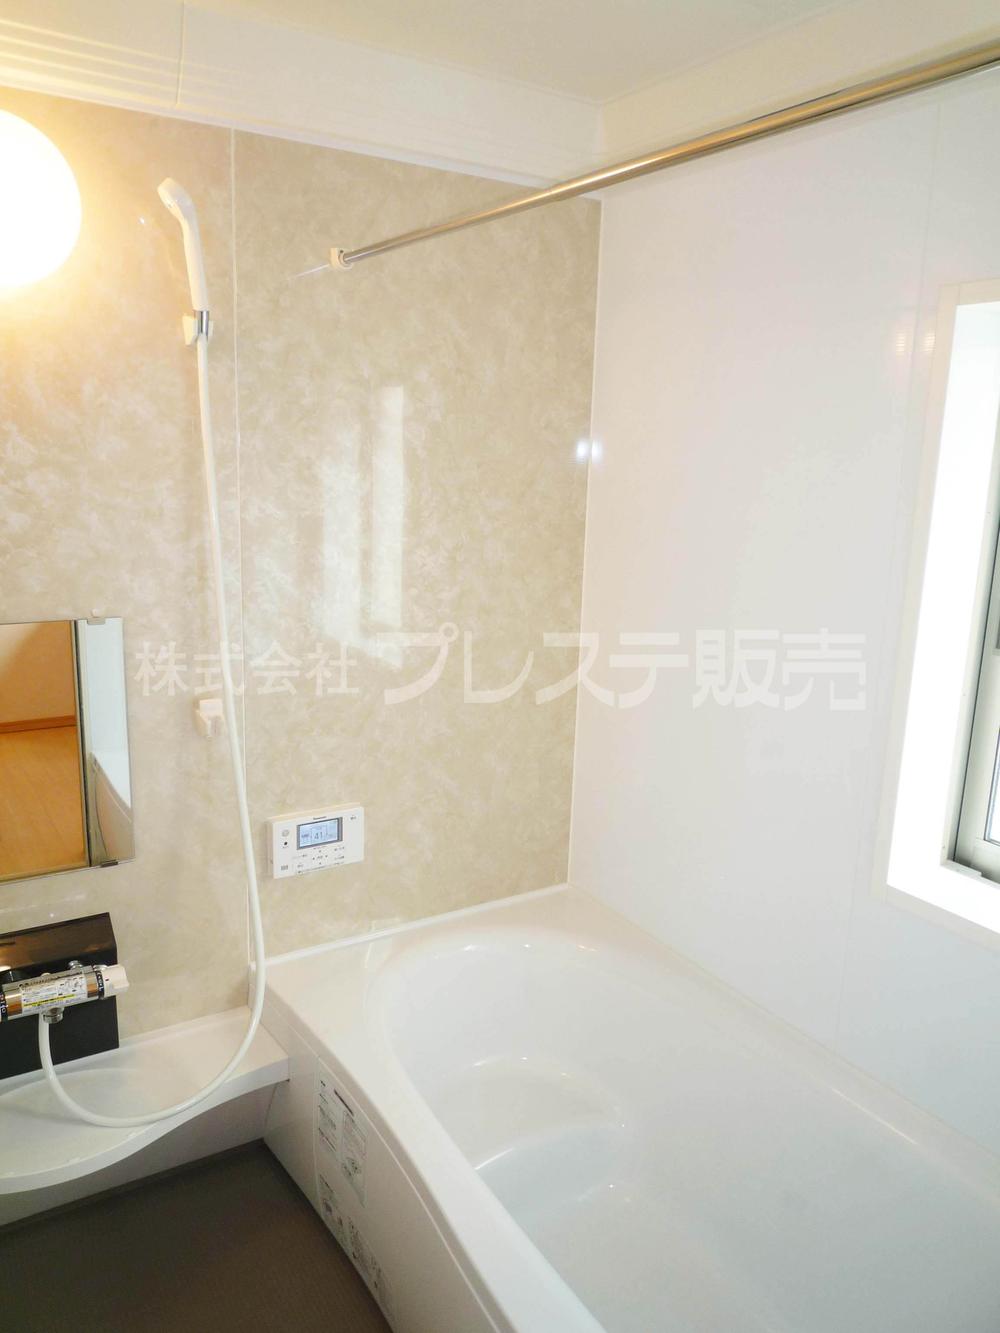 Same specifications photo (bathroom). Standard equipped with a bathroom heating dryer! 